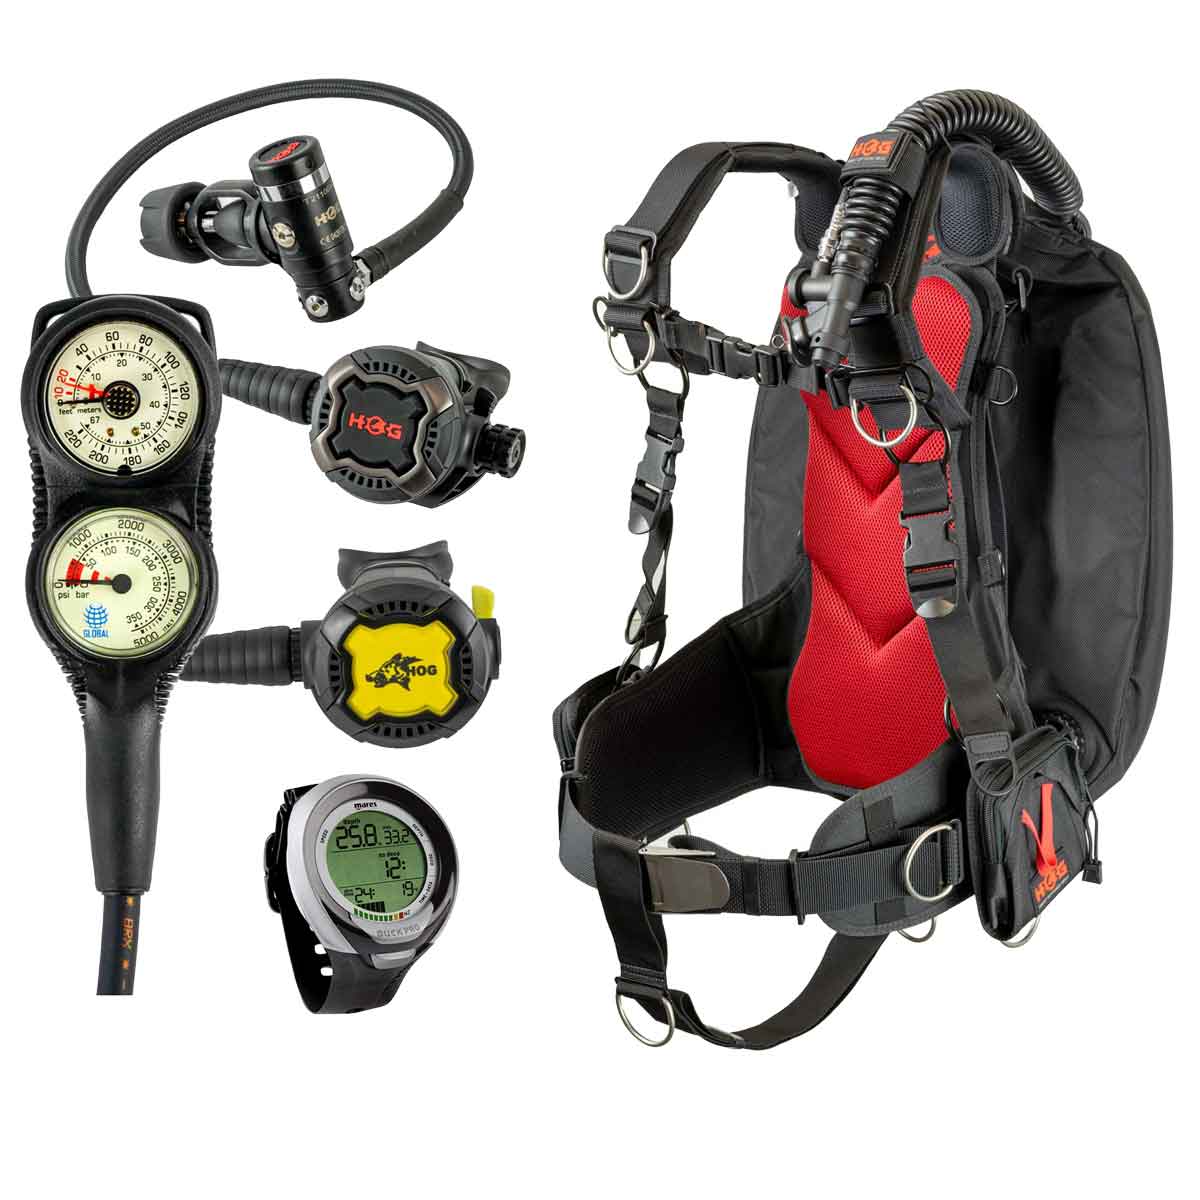 Buy Hog Total Bcd Scuba Gear System Package Online Divers Supply